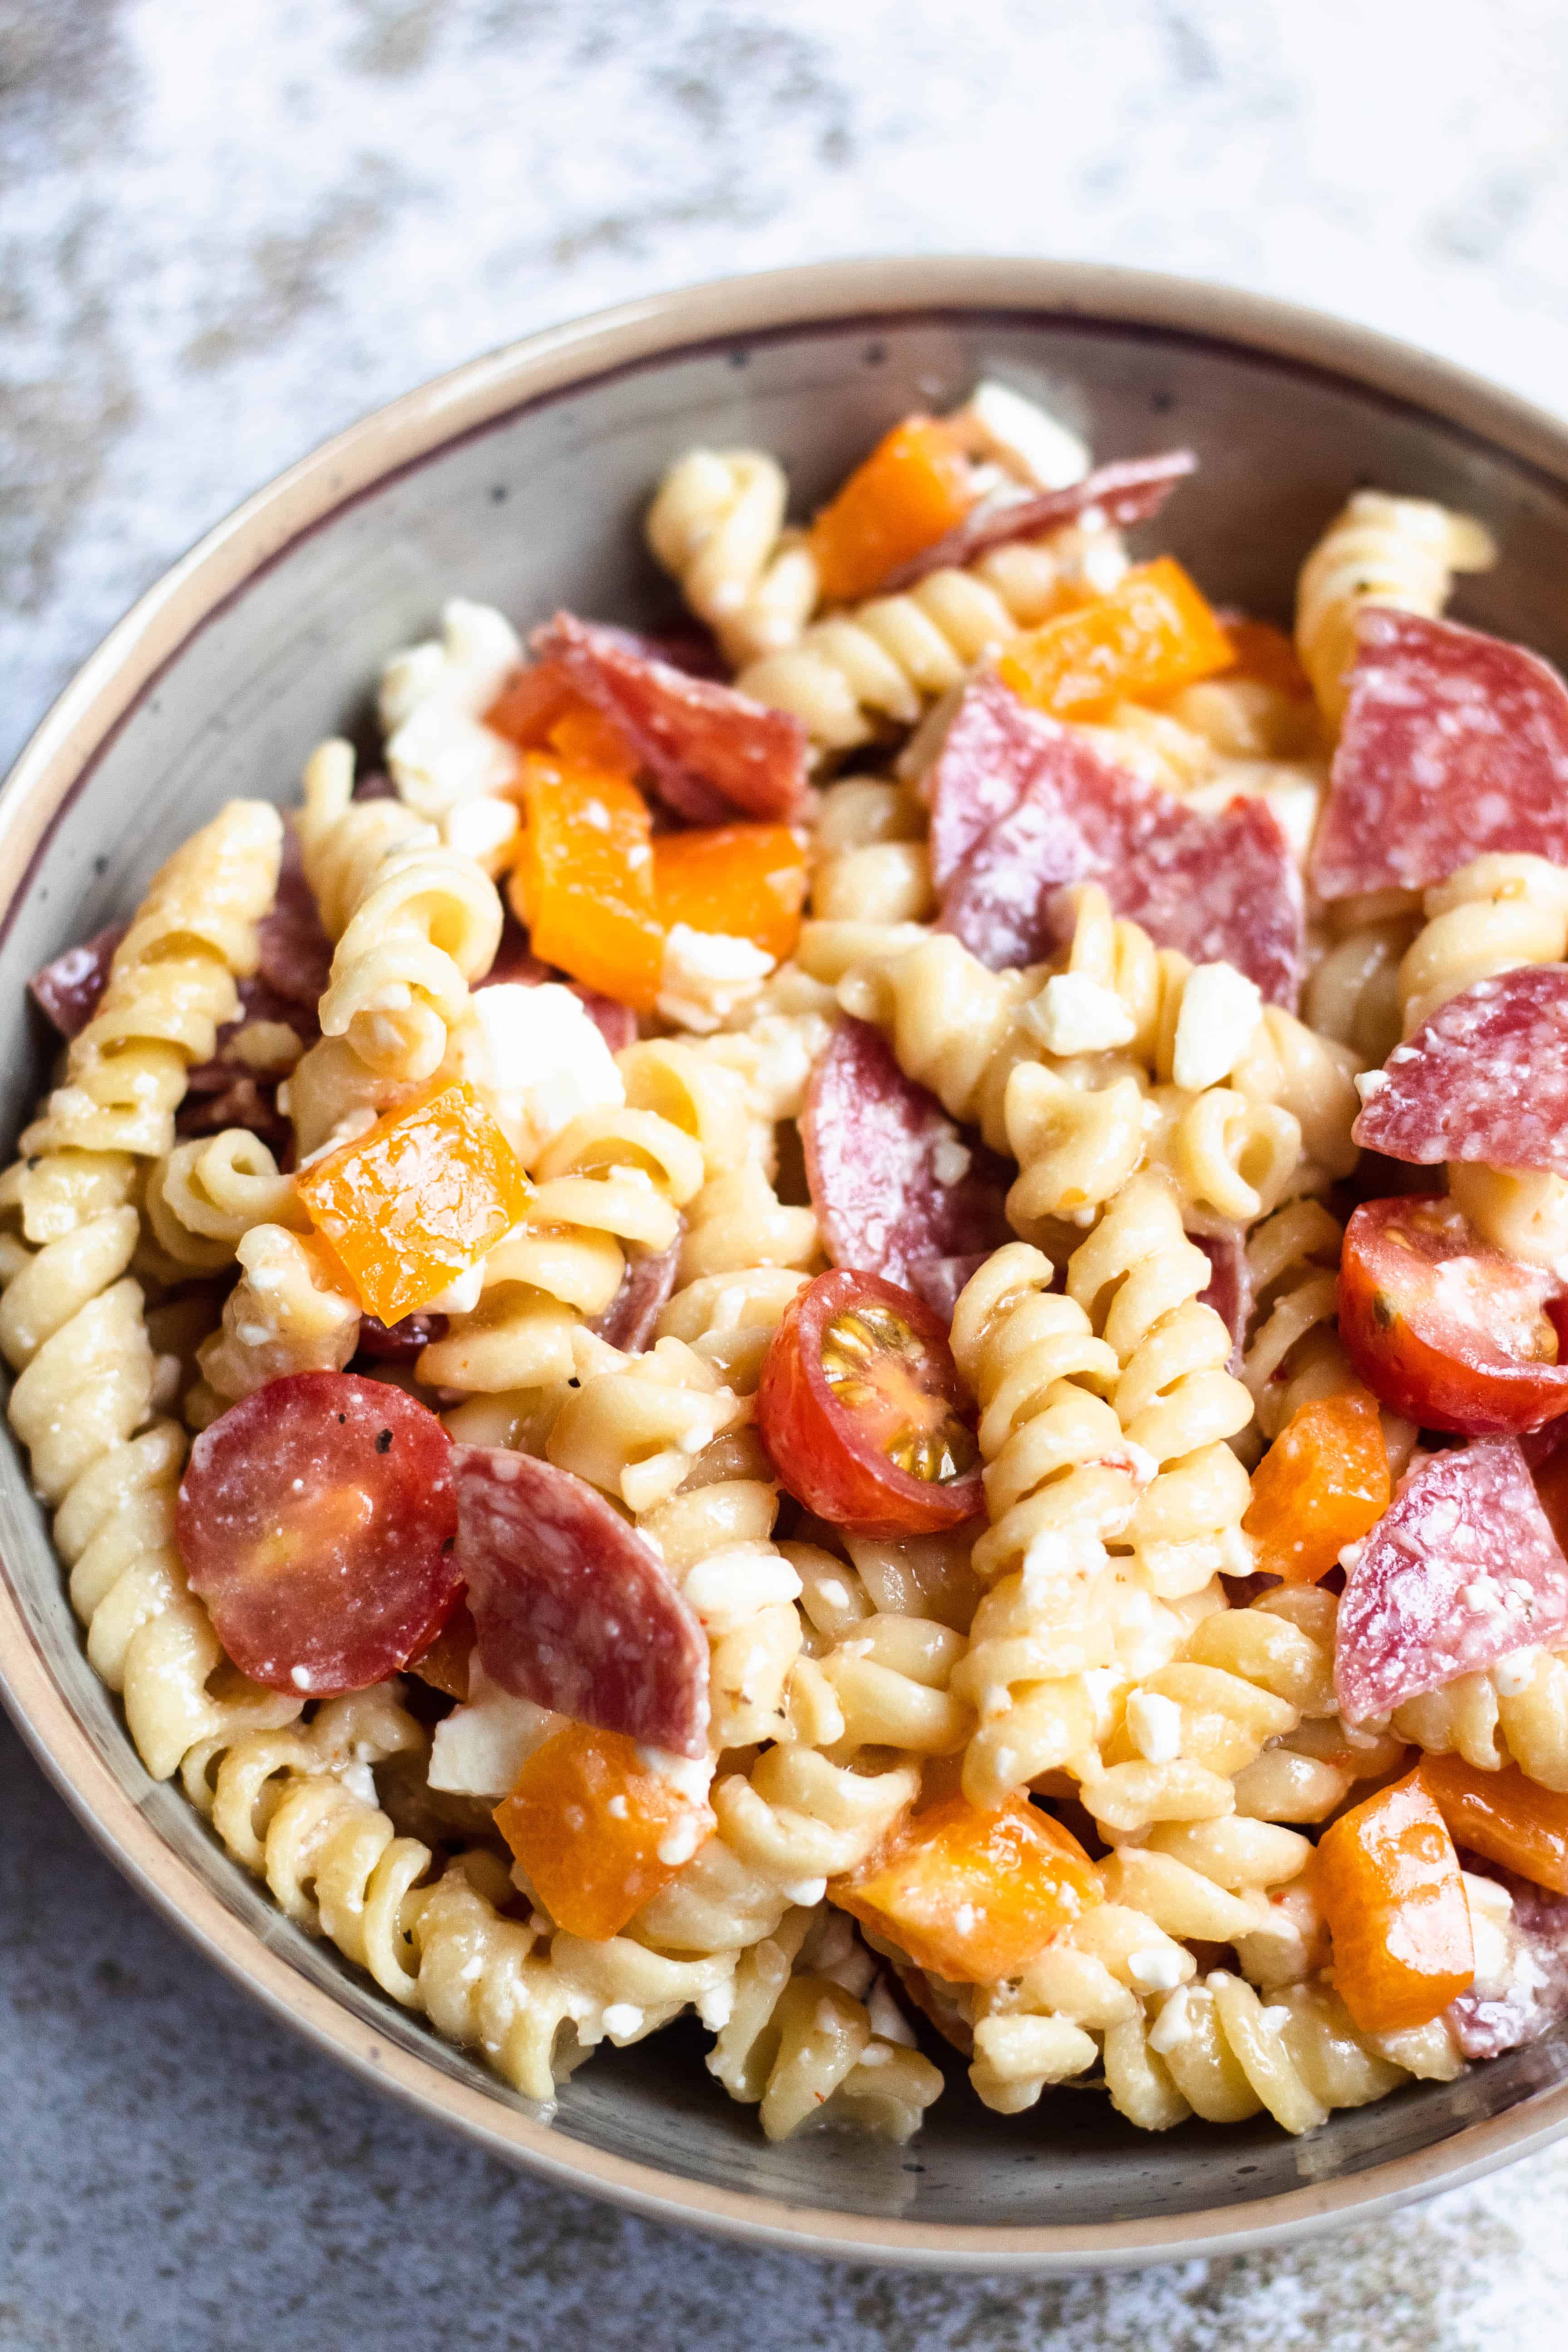 Easy Pasta Salad Recipe in Your Instant Pot - The Foreign Fork